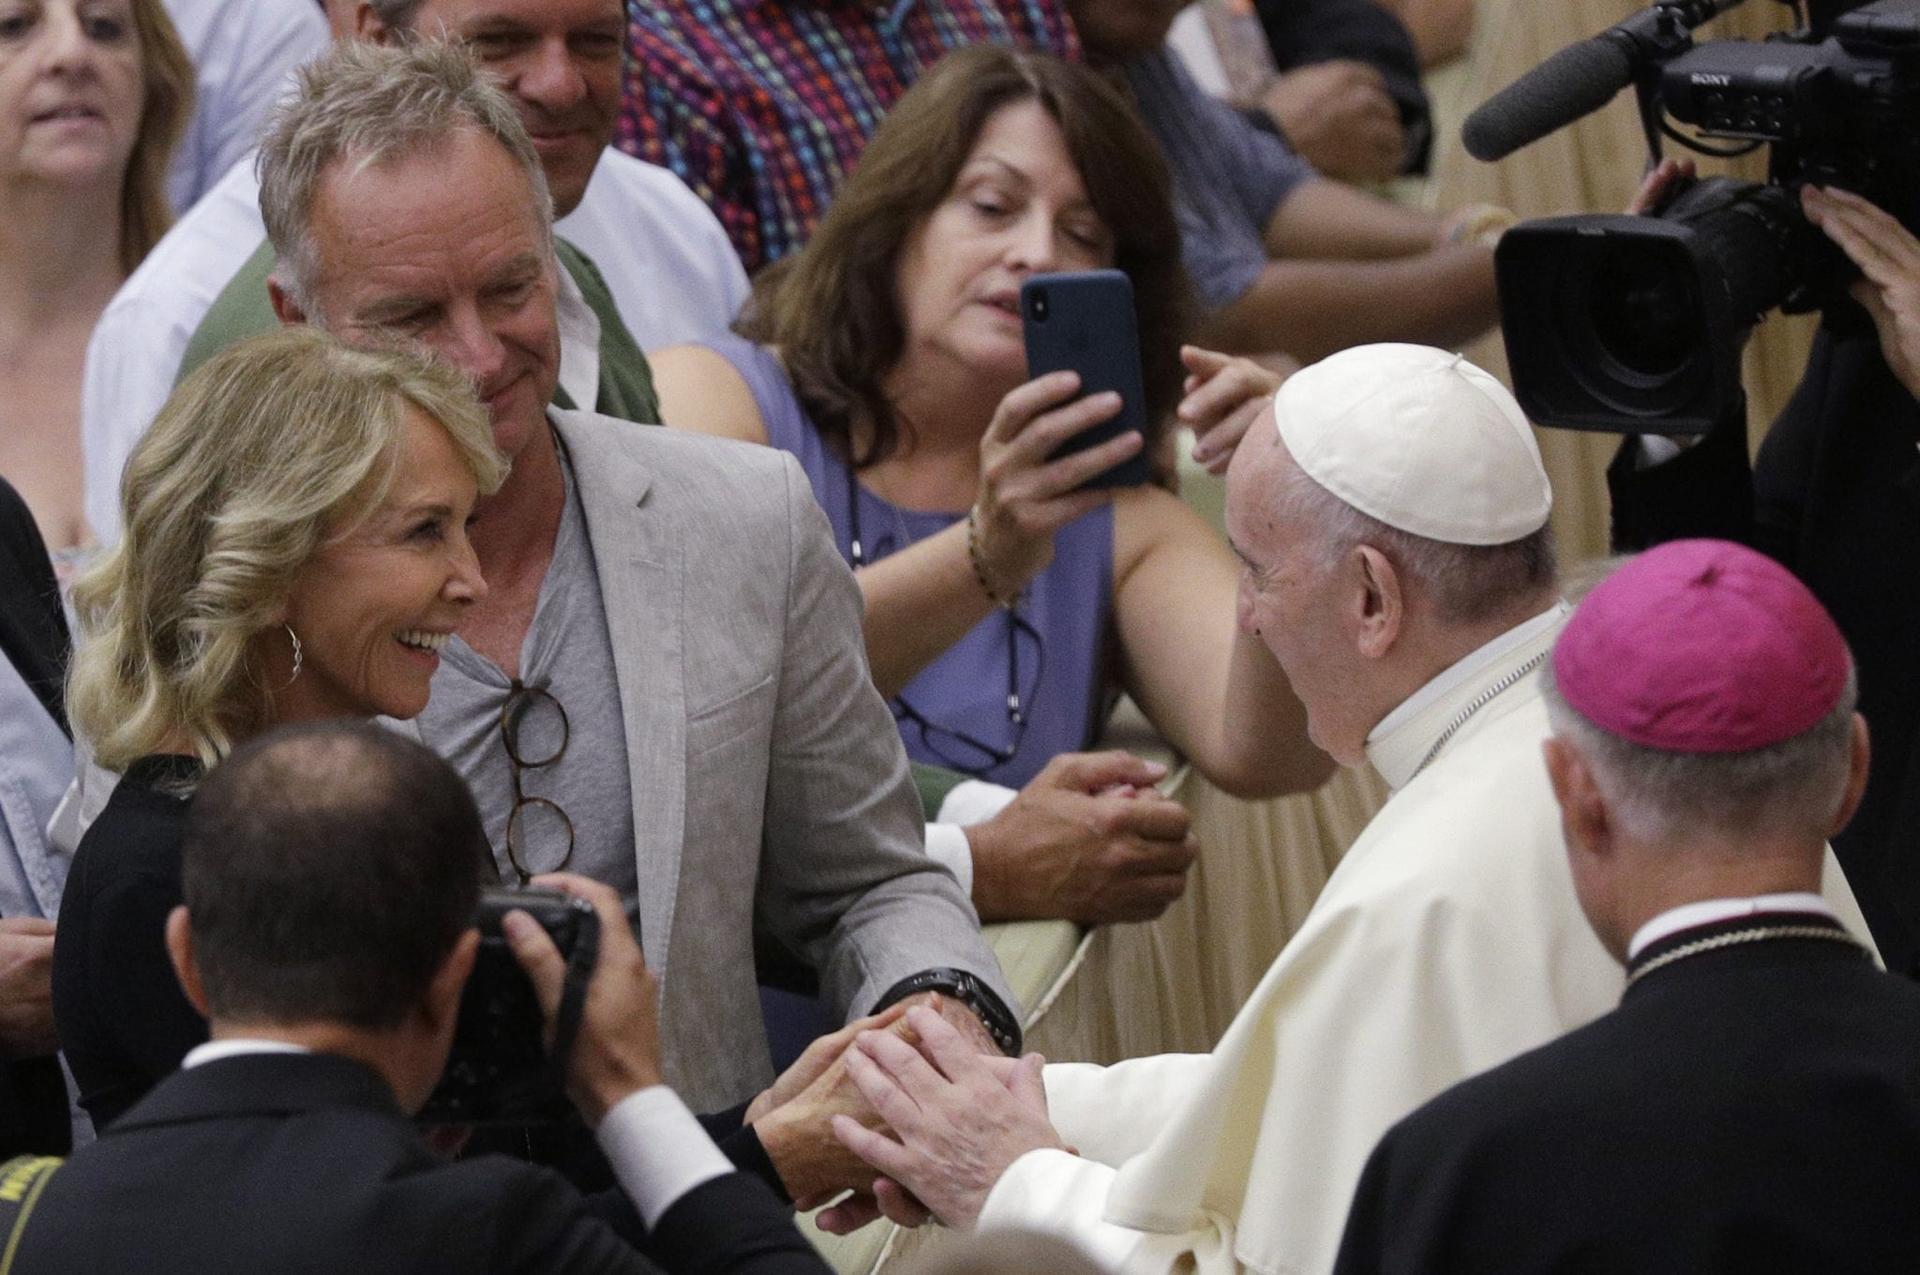 Pope Francis greets Sting, before singer tours Sistine Chapel